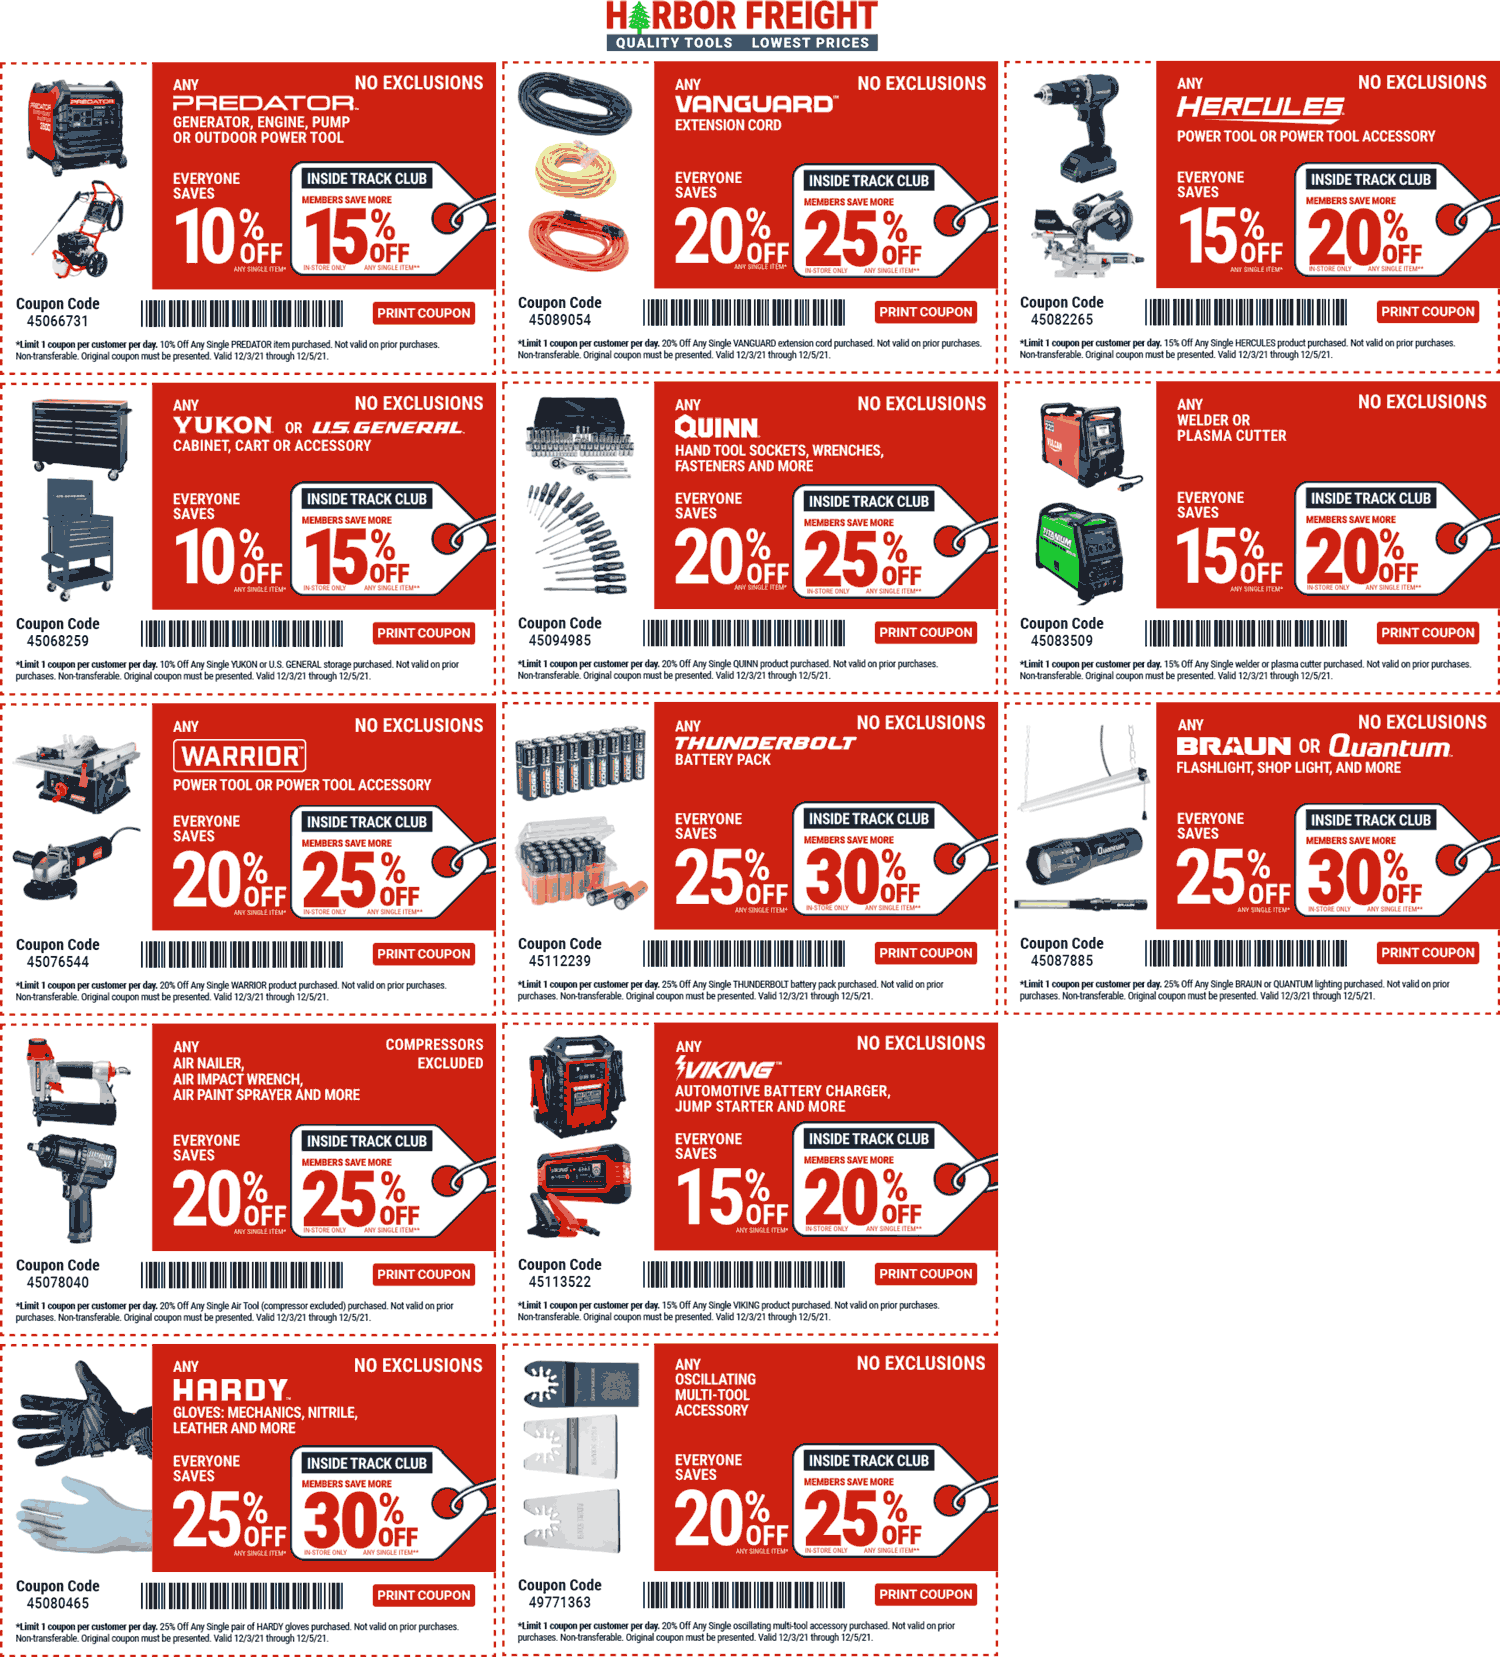 Harbor Freight stores Coupon  Various deals this weekend at Harbor Freight Tools #harborfreight 